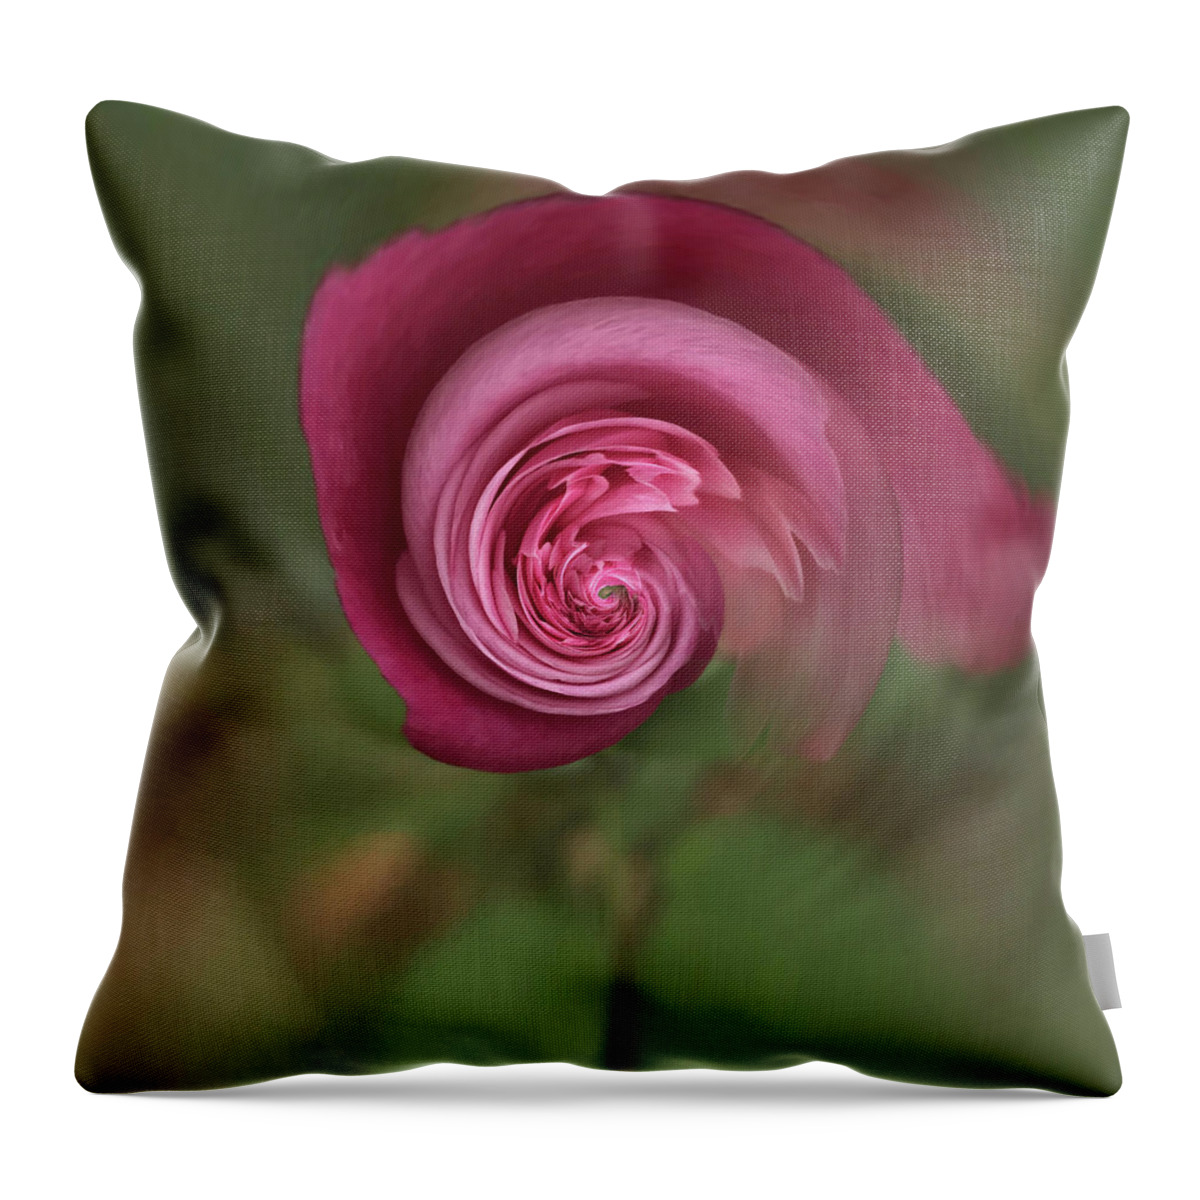 Rose Throw Pillow featuring the photograph Floral fantasy 1 by Usha Peddamatham